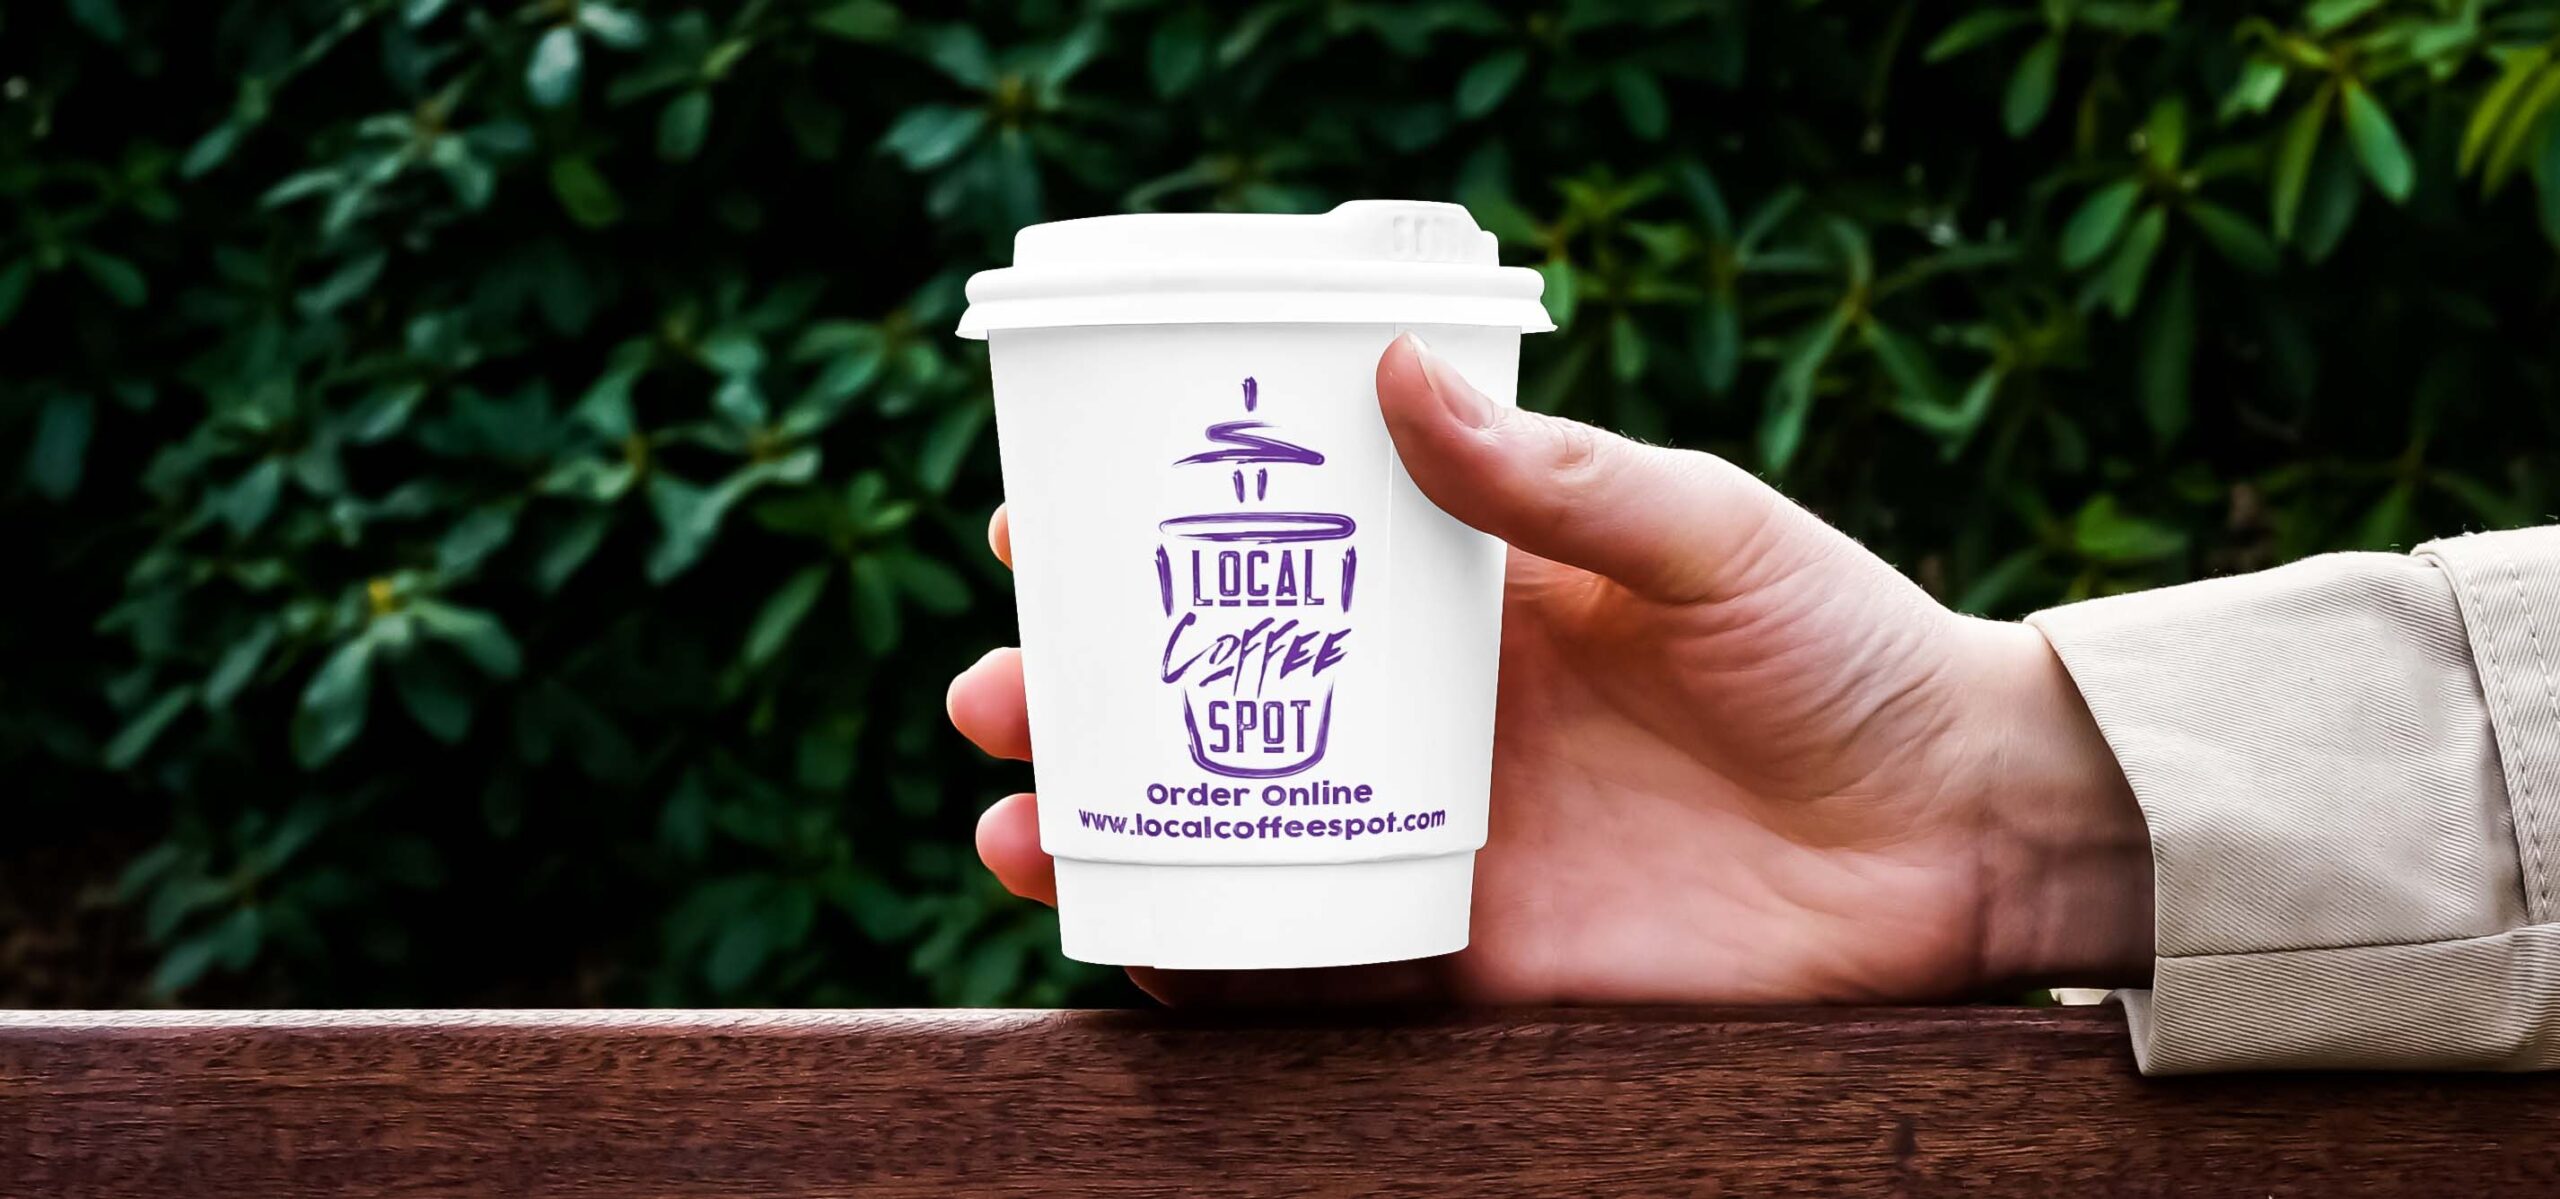 Photo of a hand holding a coffee cup in front of a leafy bush.